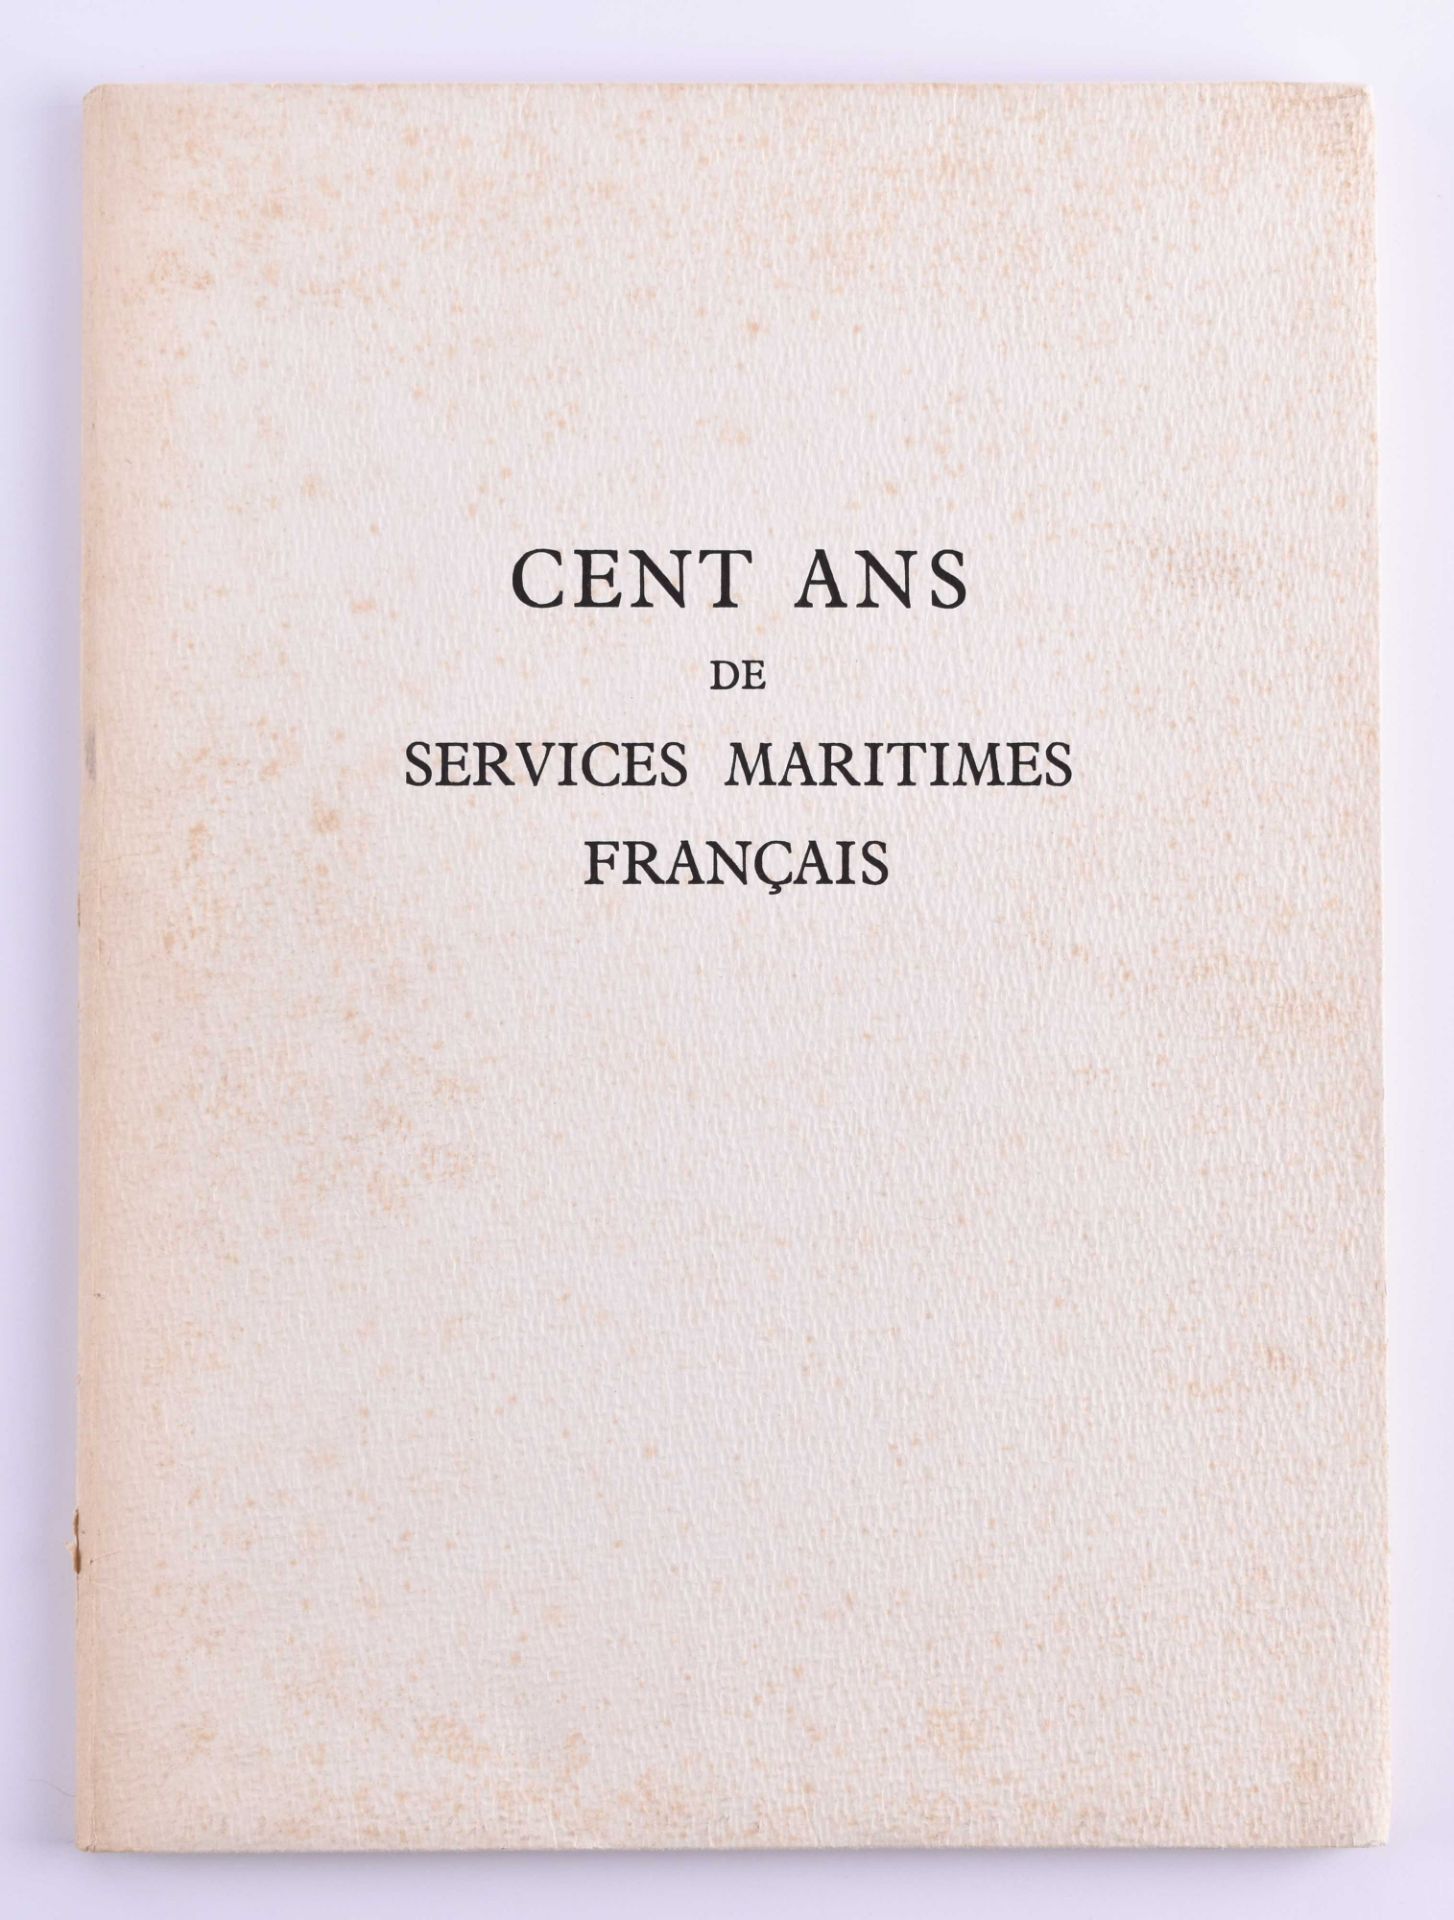 France Cent ans de services Maritimes Françaisprinted on loose laid paper, with woodcuts by